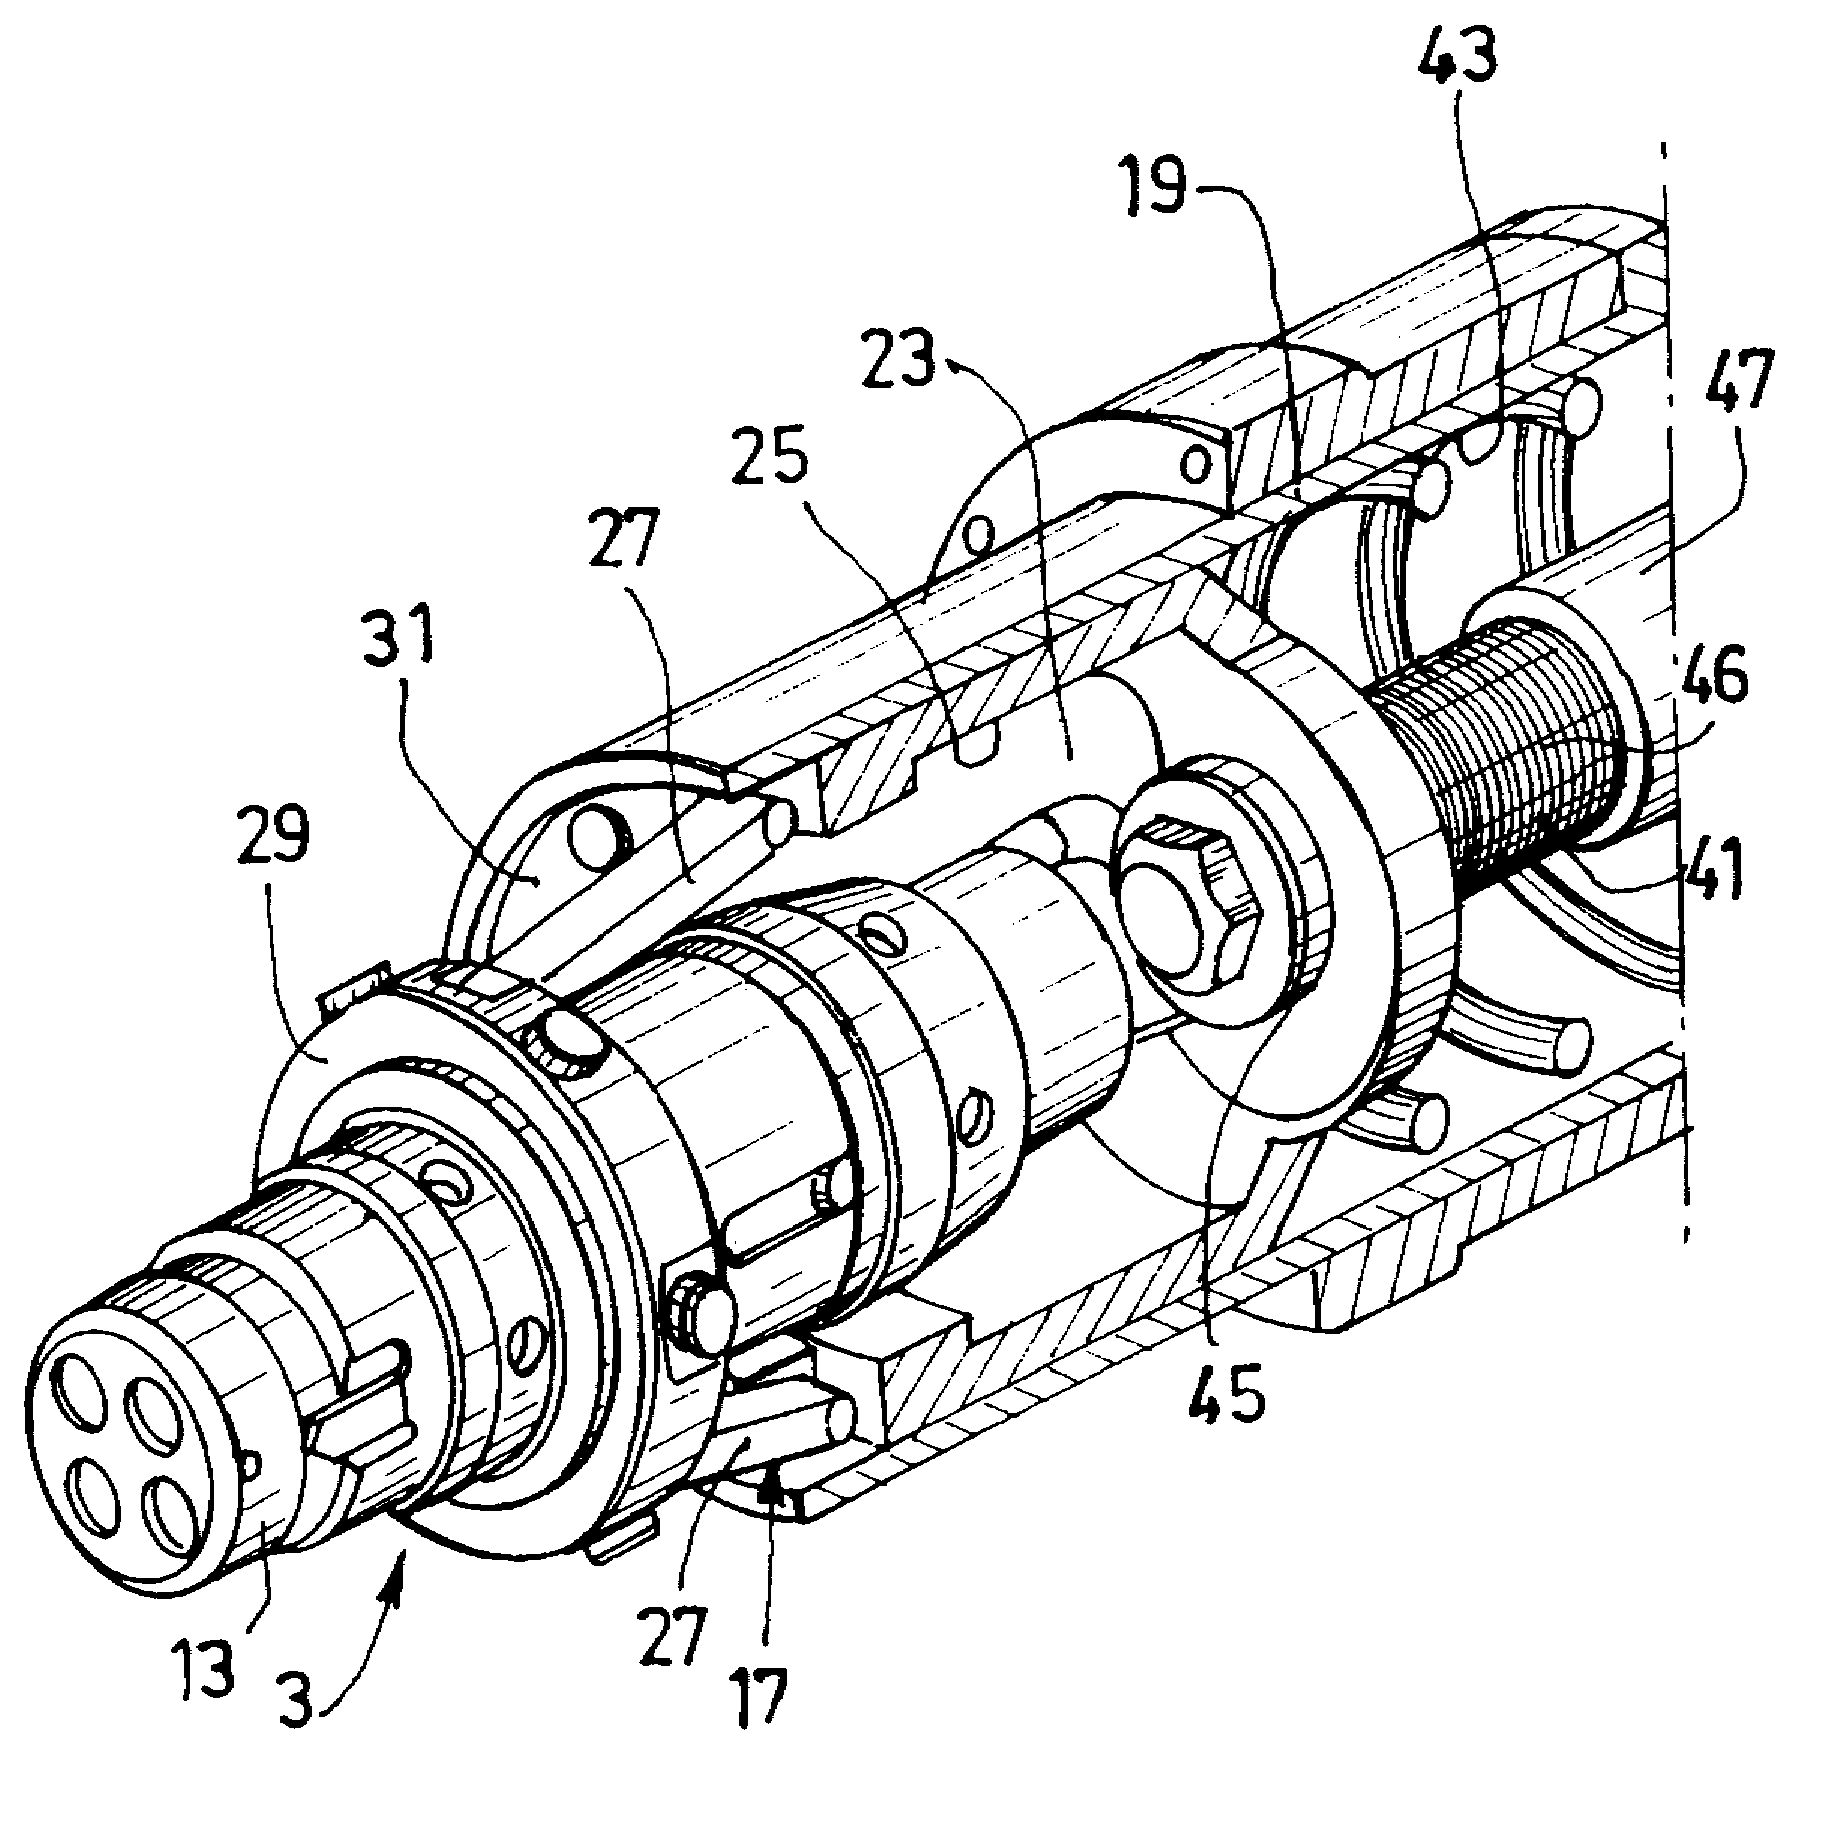 Electrical or optical or hydraulic connector that self-aligns the plug with respect to the base, particularly for offshore connections